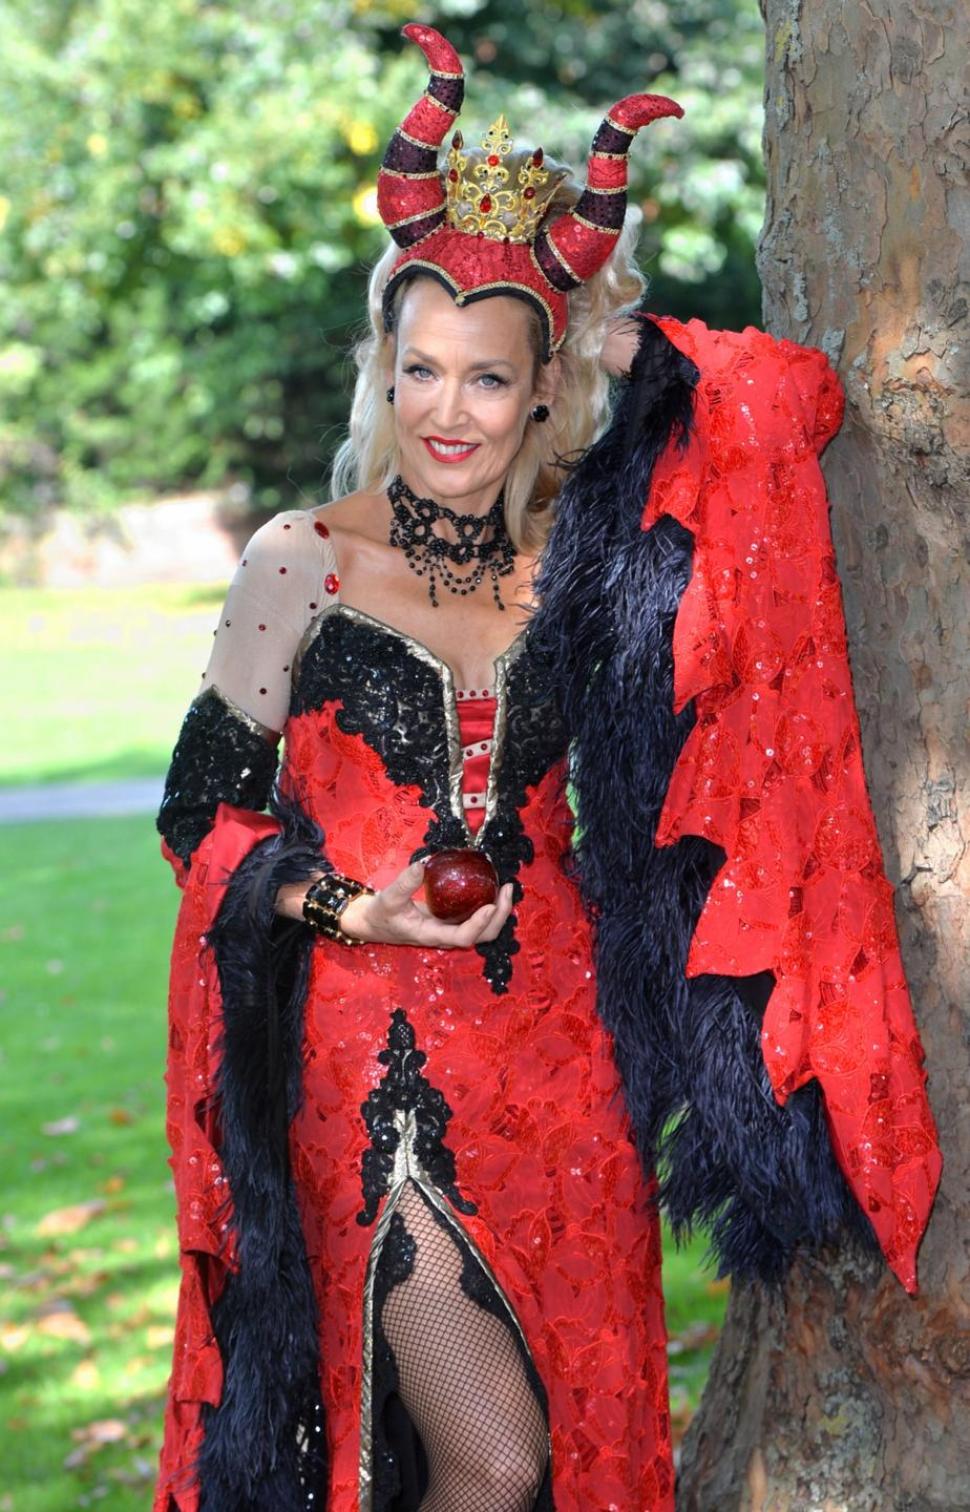 Jerry Hall will have wicked fun in ‘Snow White and the Seven Dwarfs’ in the U.K.